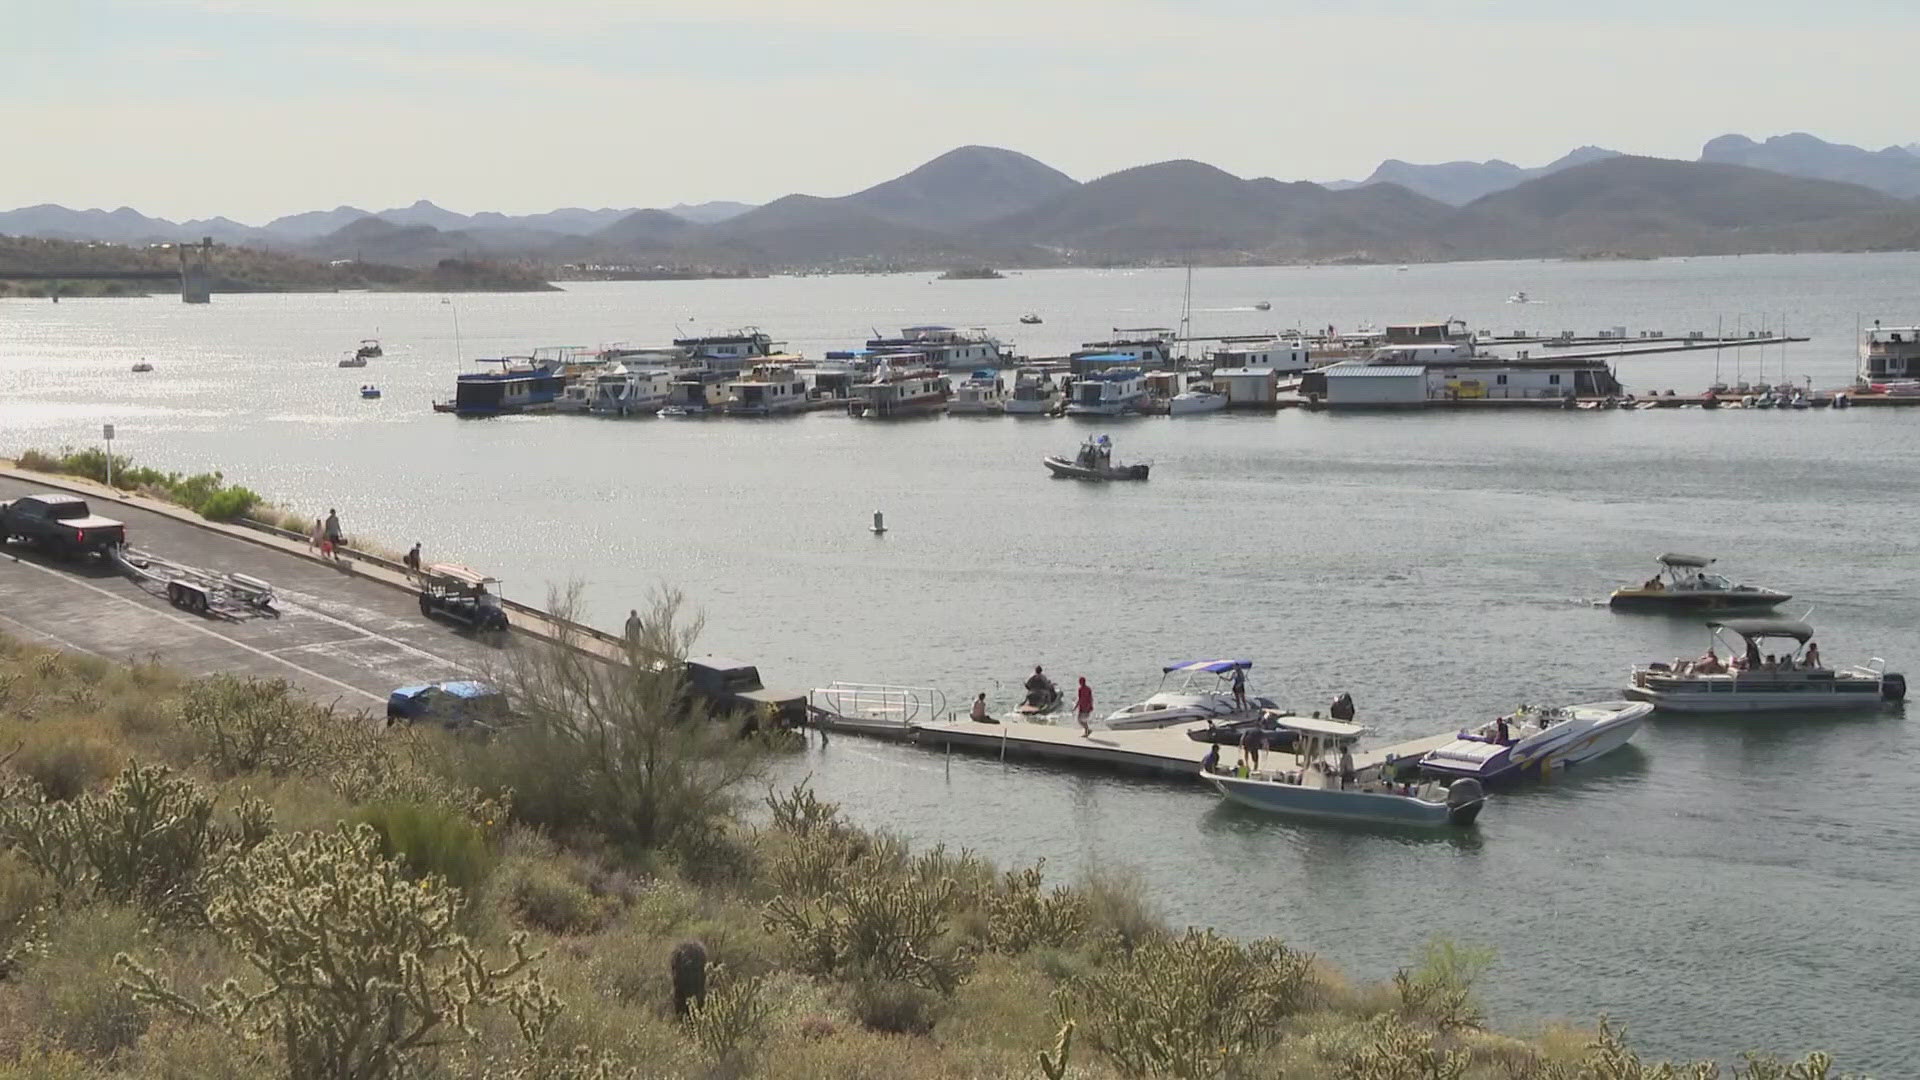 A man went missing after diving in Lake Pleasant to retrieve a hat that fell into the water. Watch the video above for the latest details.